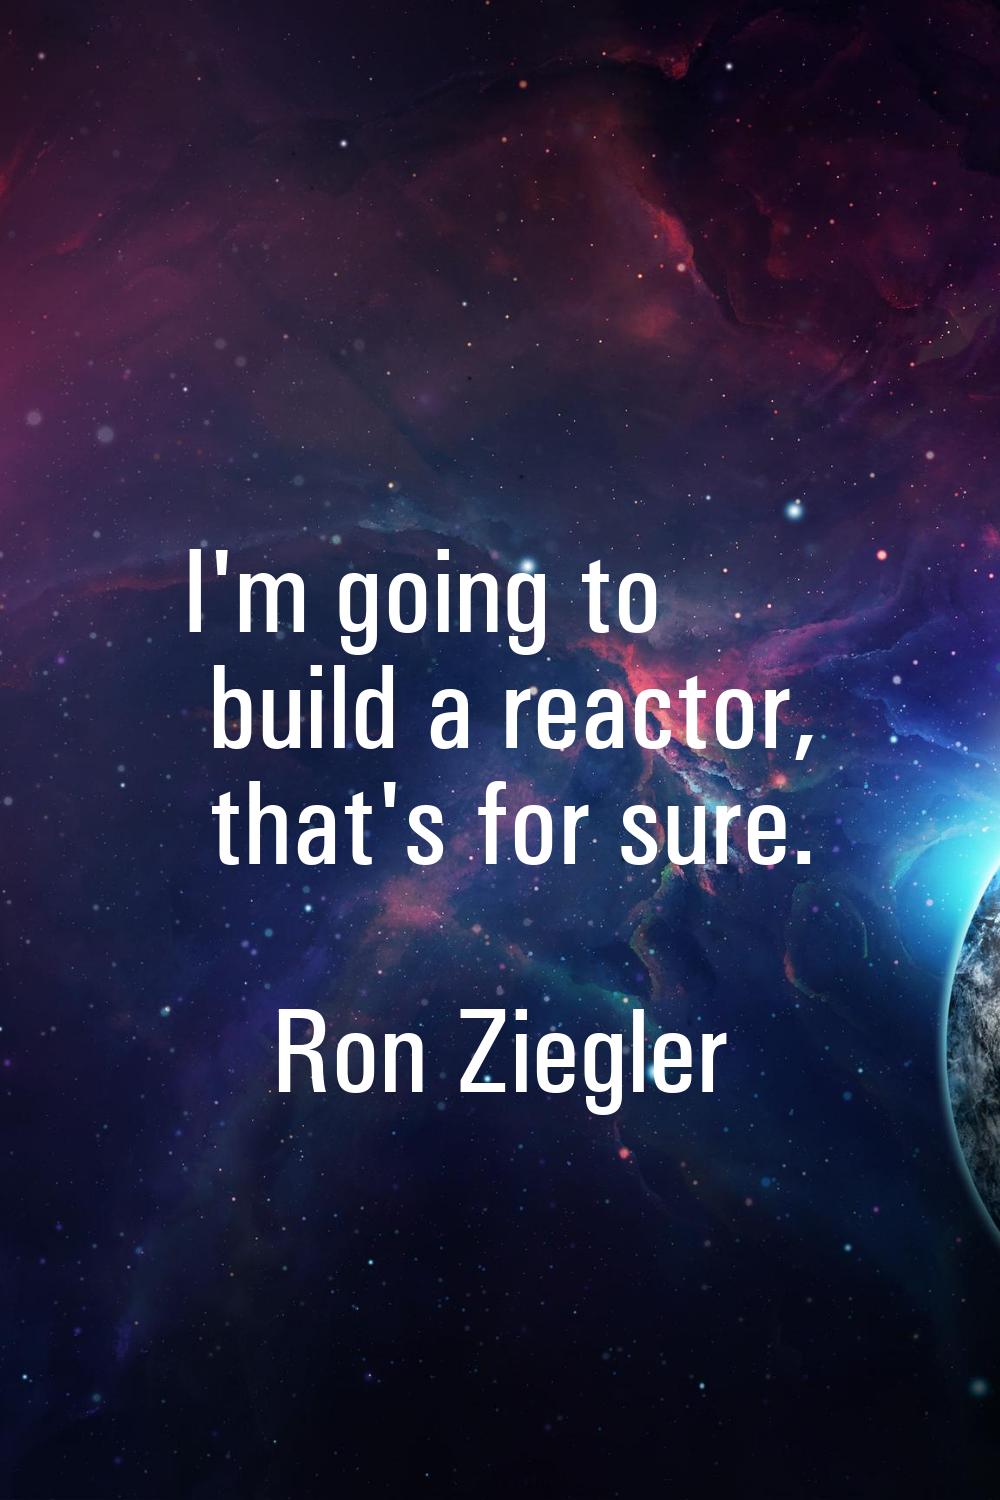 I'm going to build a reactor, that's for sure.